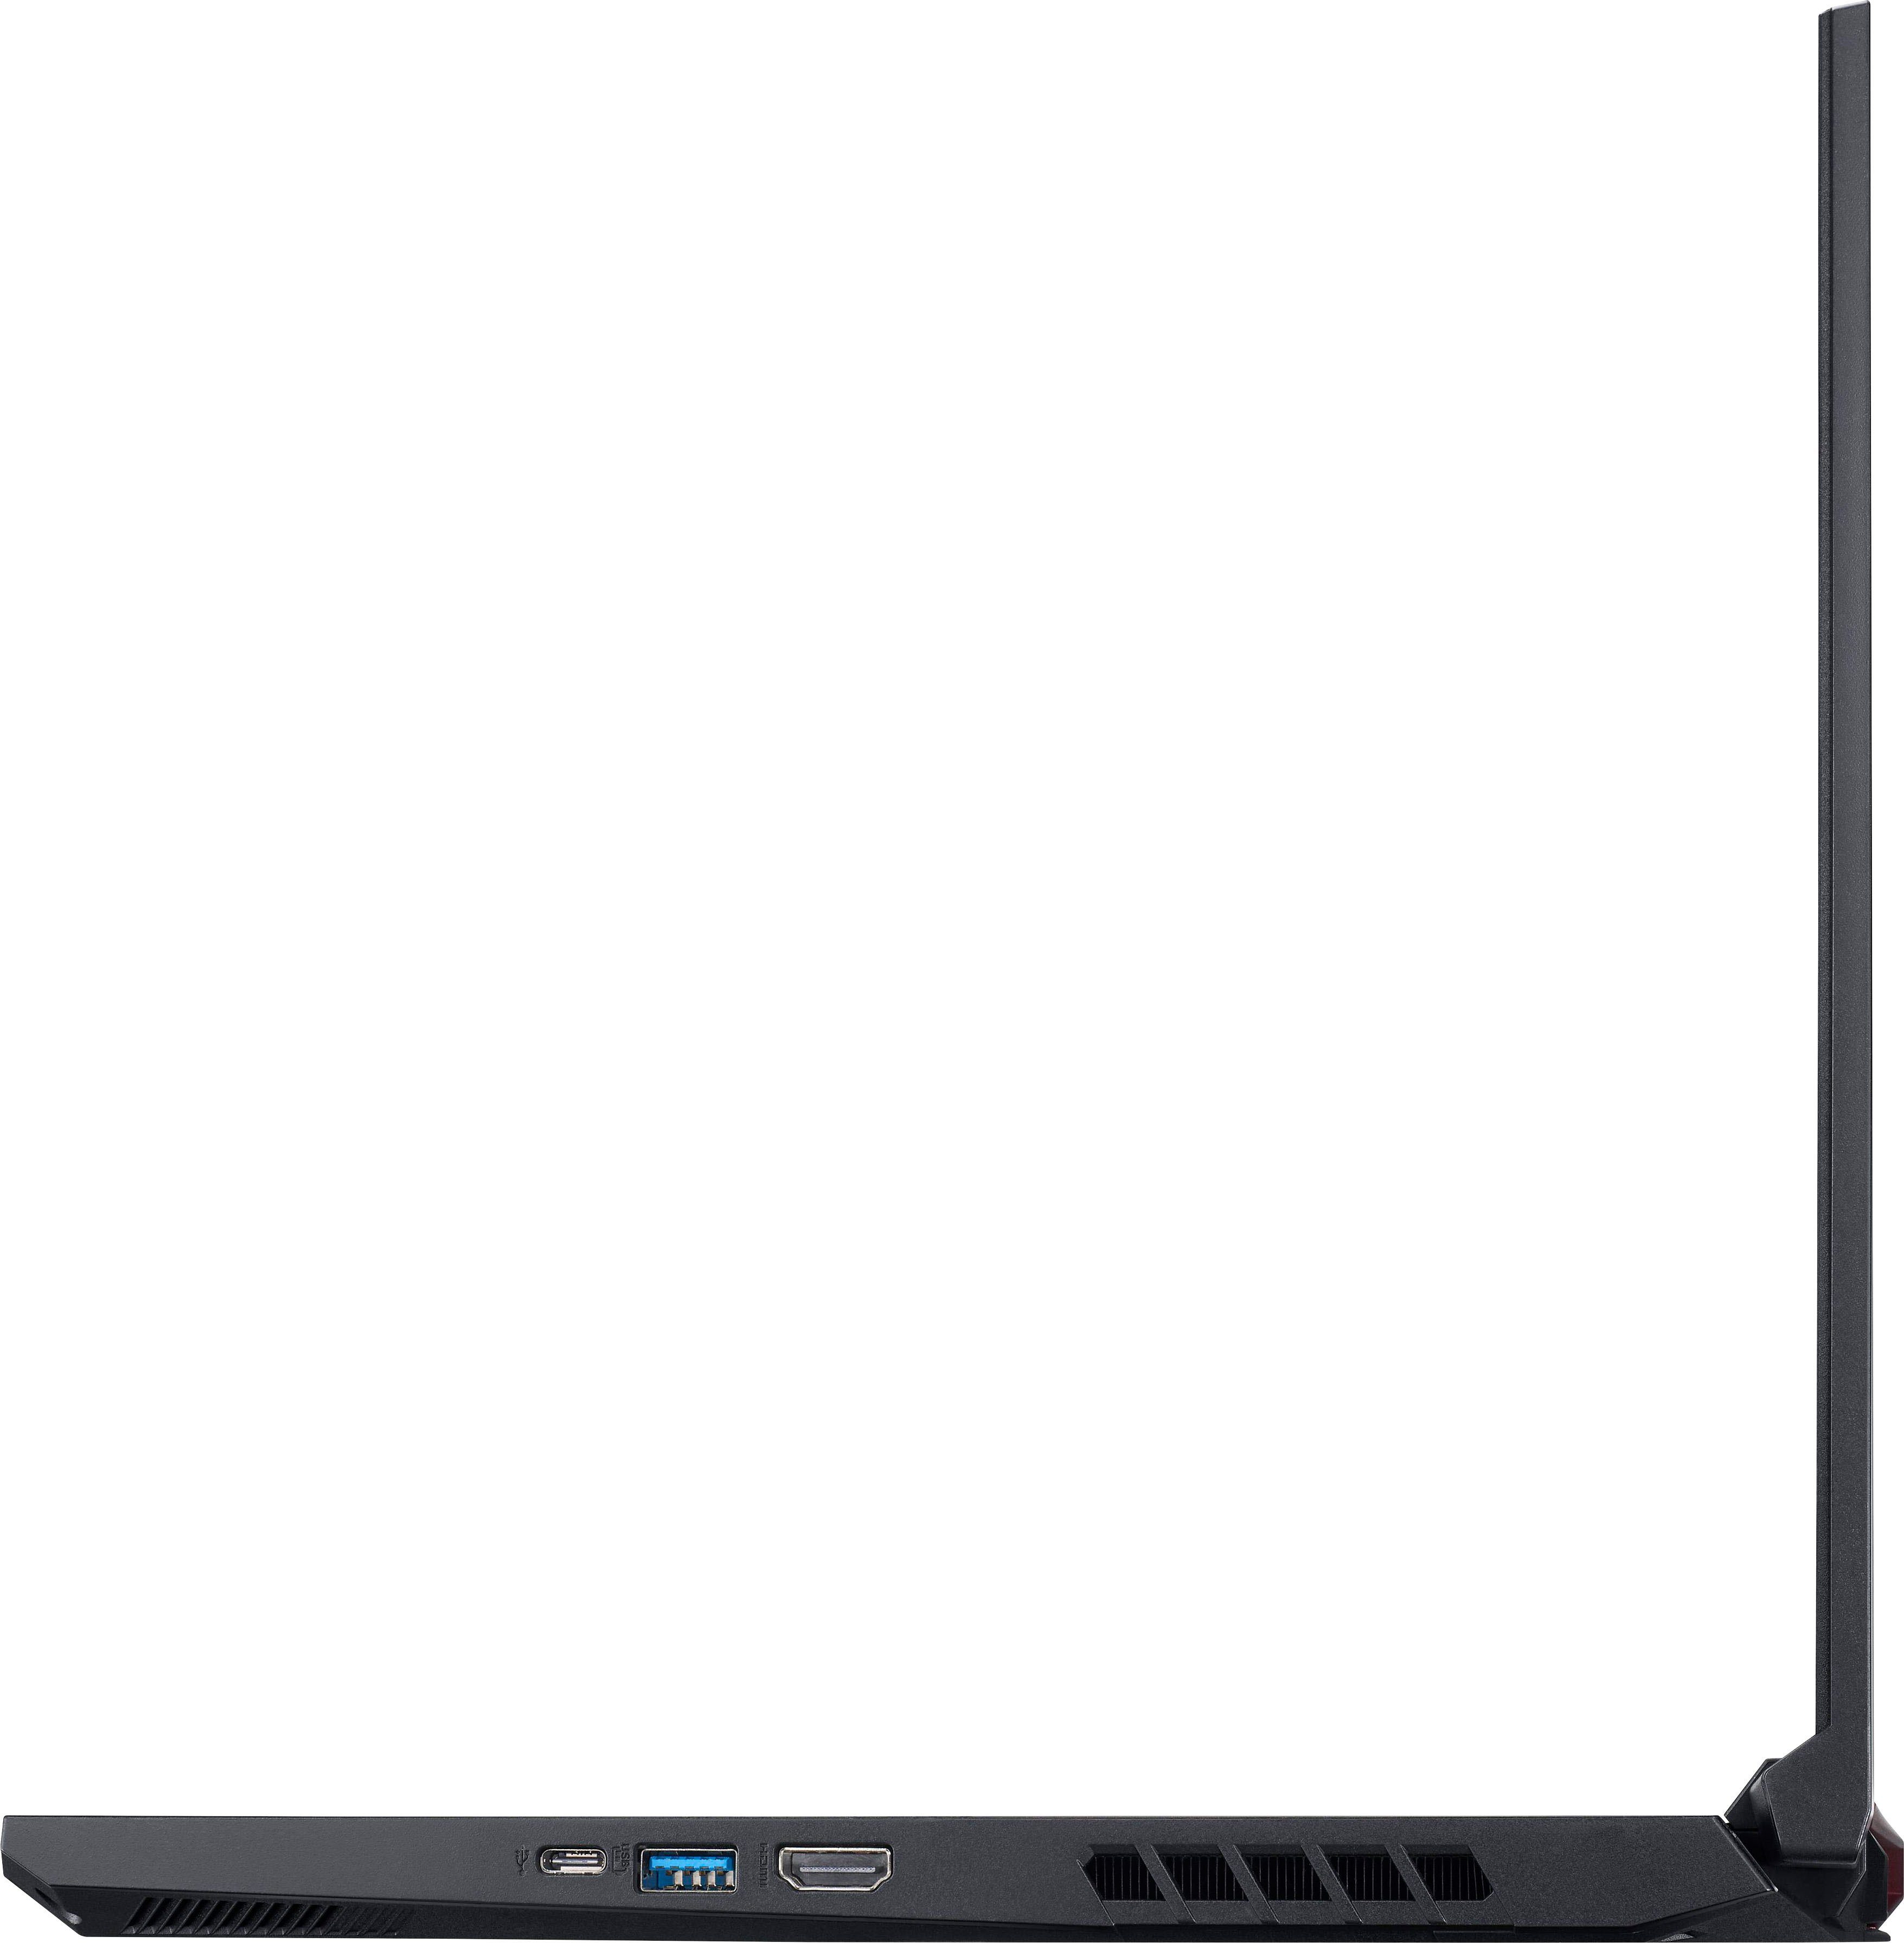 GB Intel Nitro AN515-55-766W (39,62 Zoll, 512 10750H, Core cm/15,6 RTX 3060, Acer SSD) 5 Gaming-Notebook GeForce i7